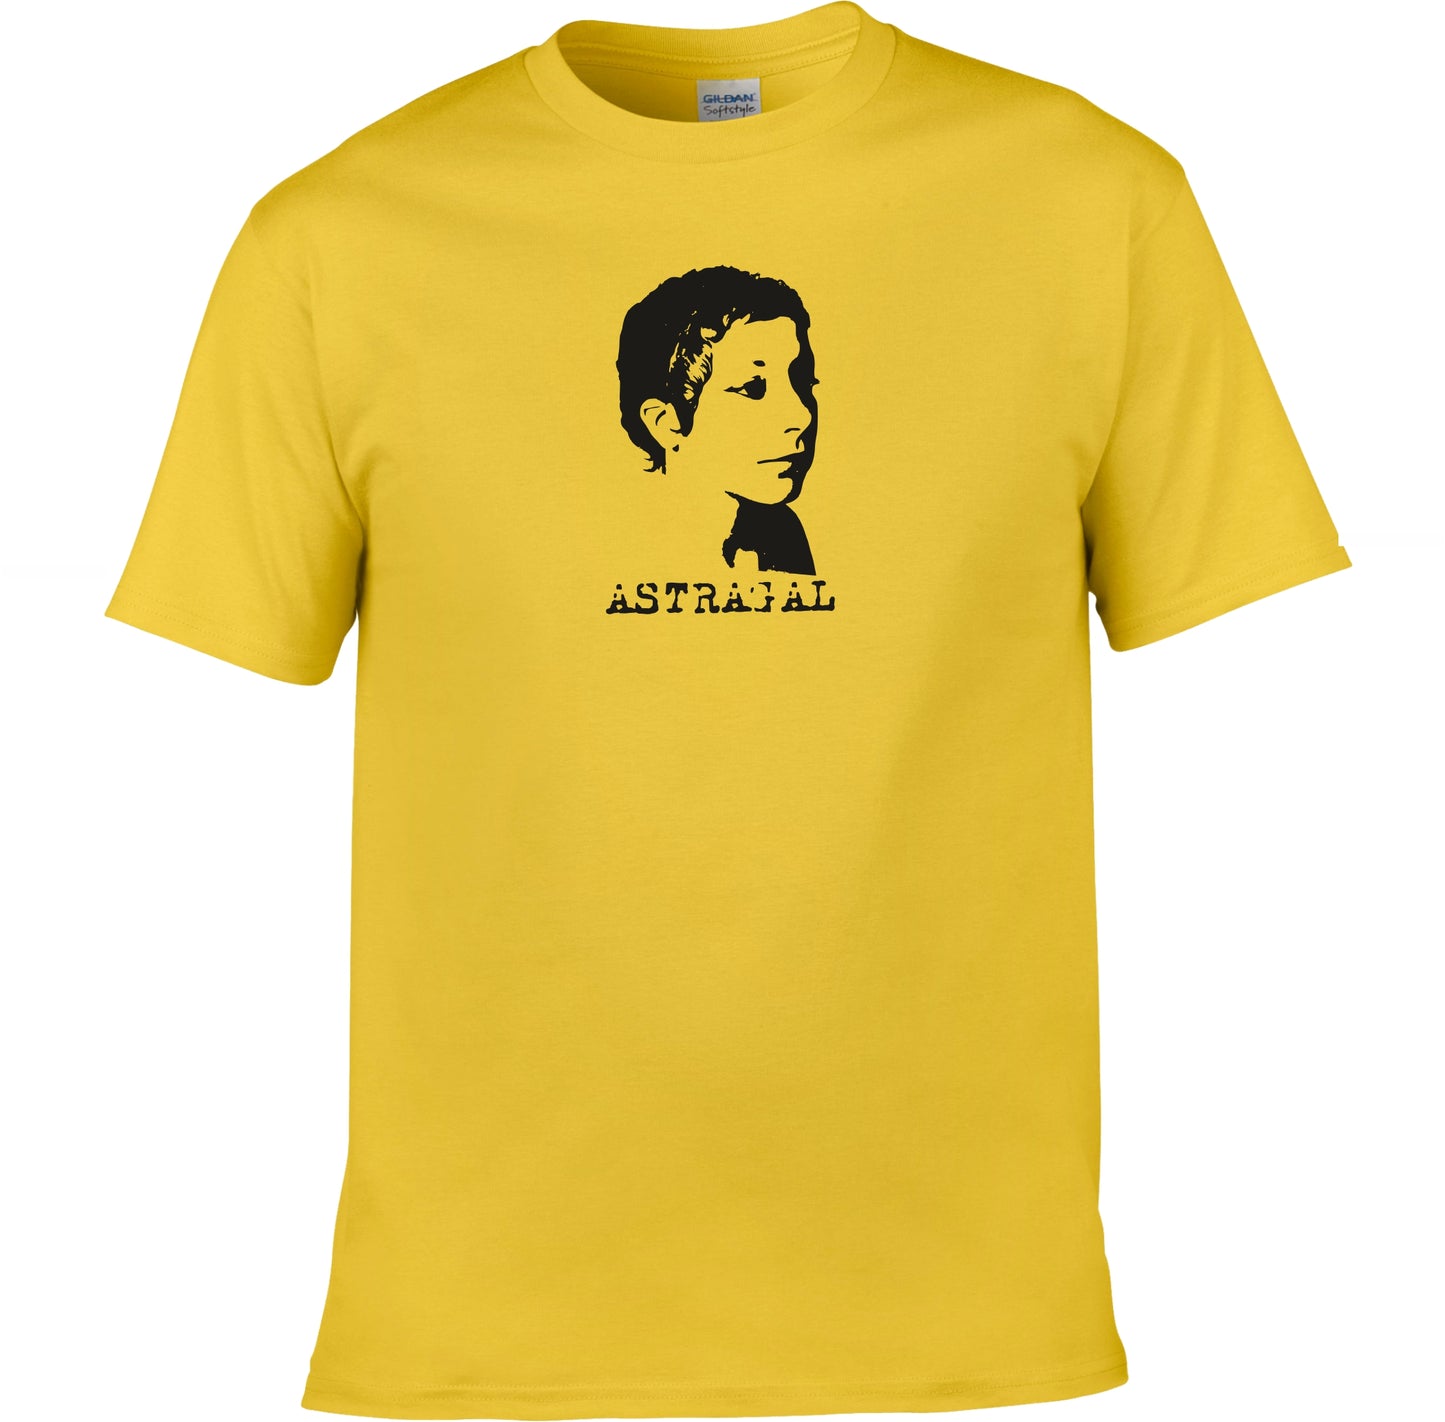 Astragal T-shirt - 60s, French, Literature, Various Colours